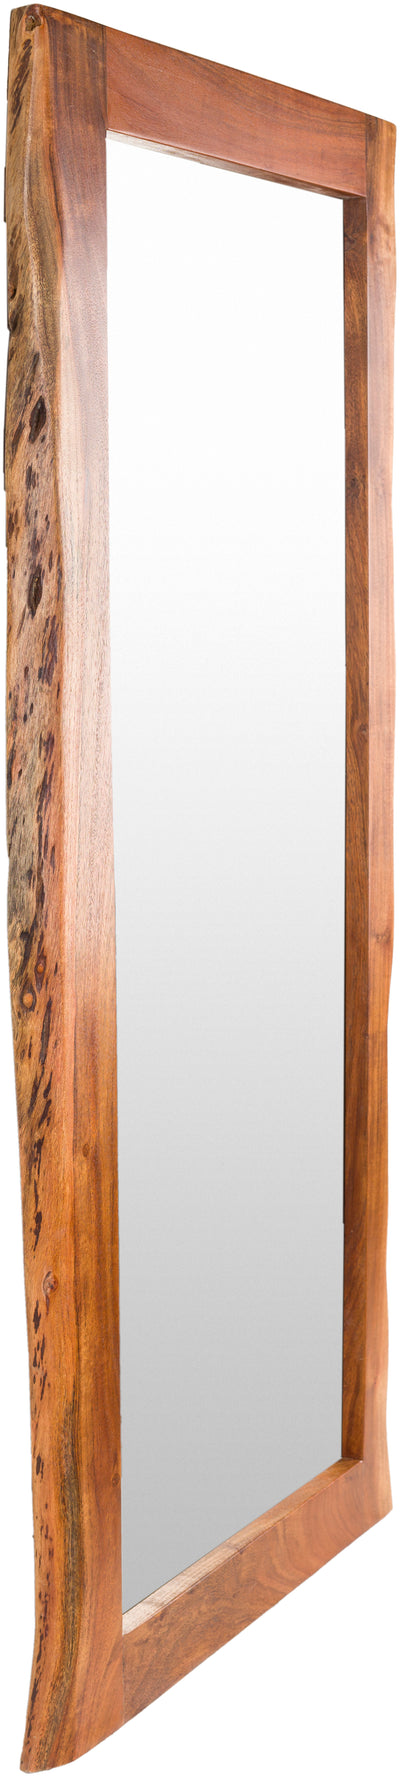 product image for Edge DGE-101 Tall Rectangular Mirror by Surya 20